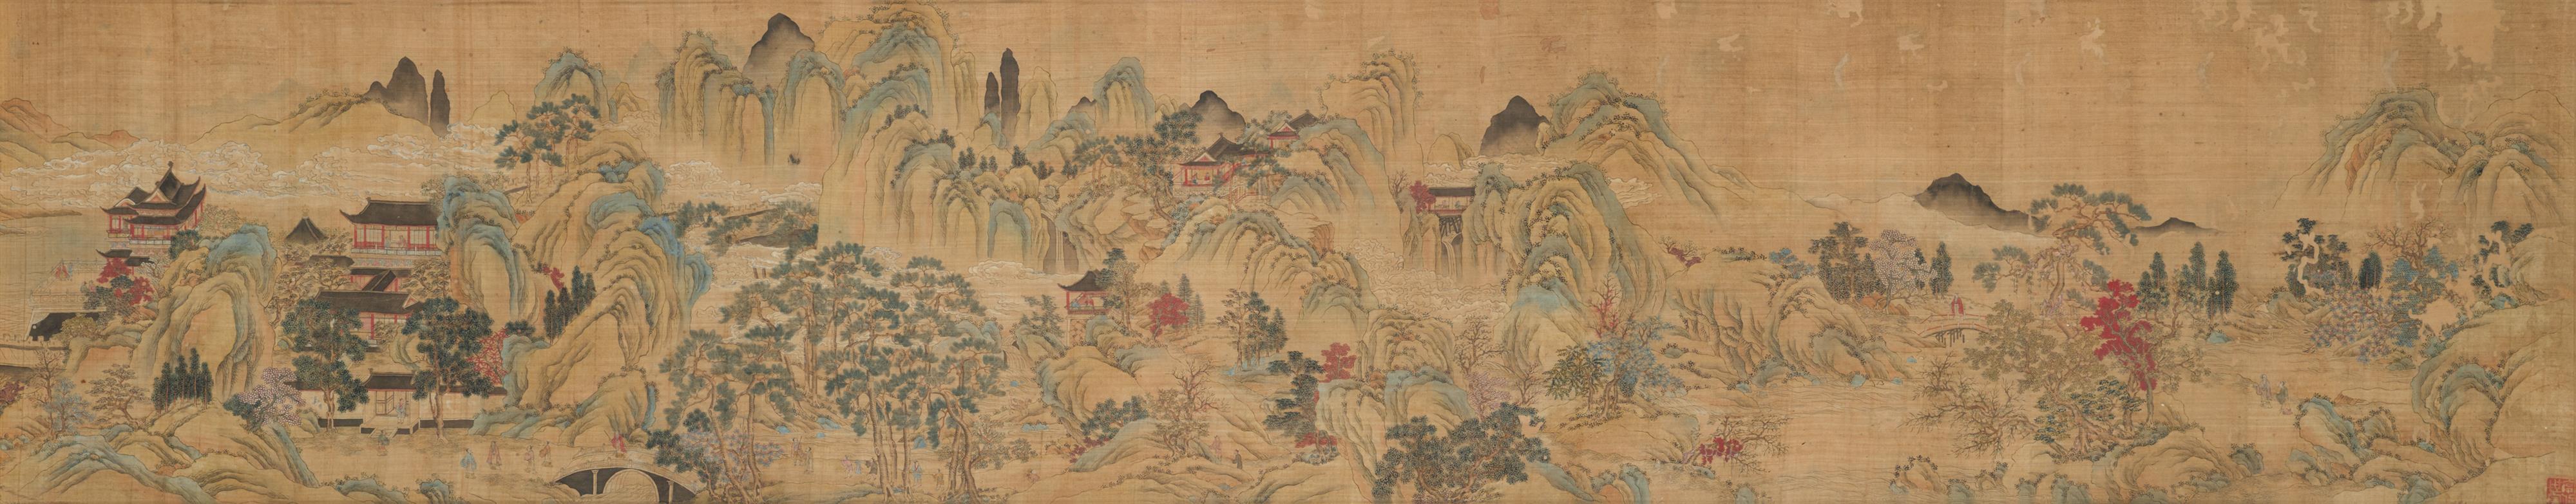 Mountain landscape with persons and buildings - image-1